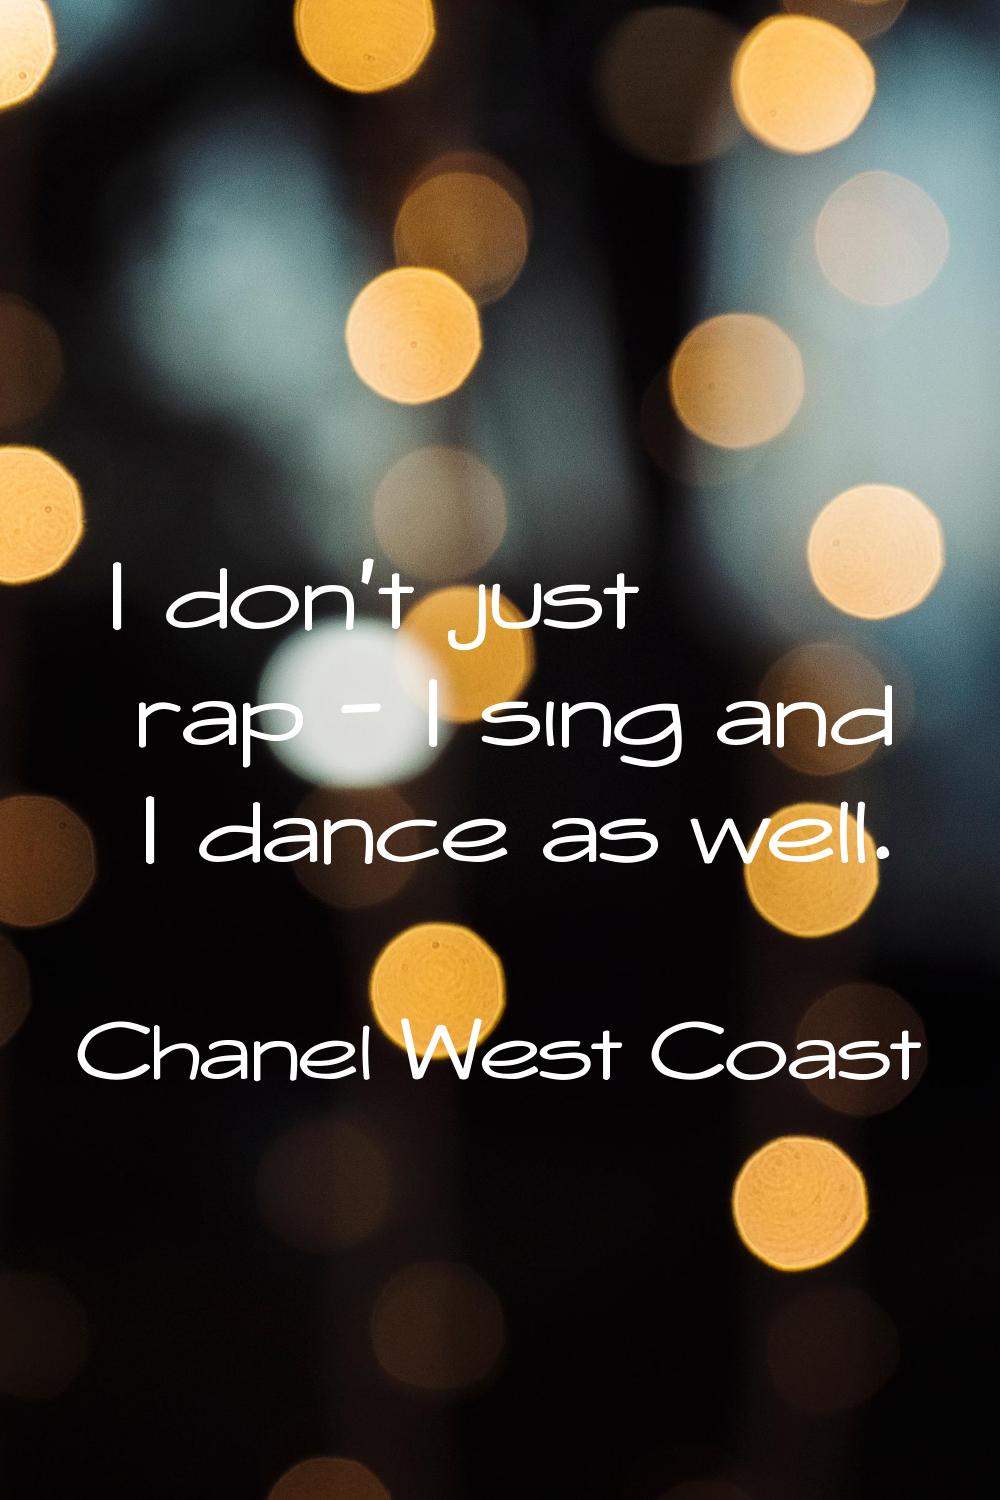 I don't just rap - I sing and I dance as well.